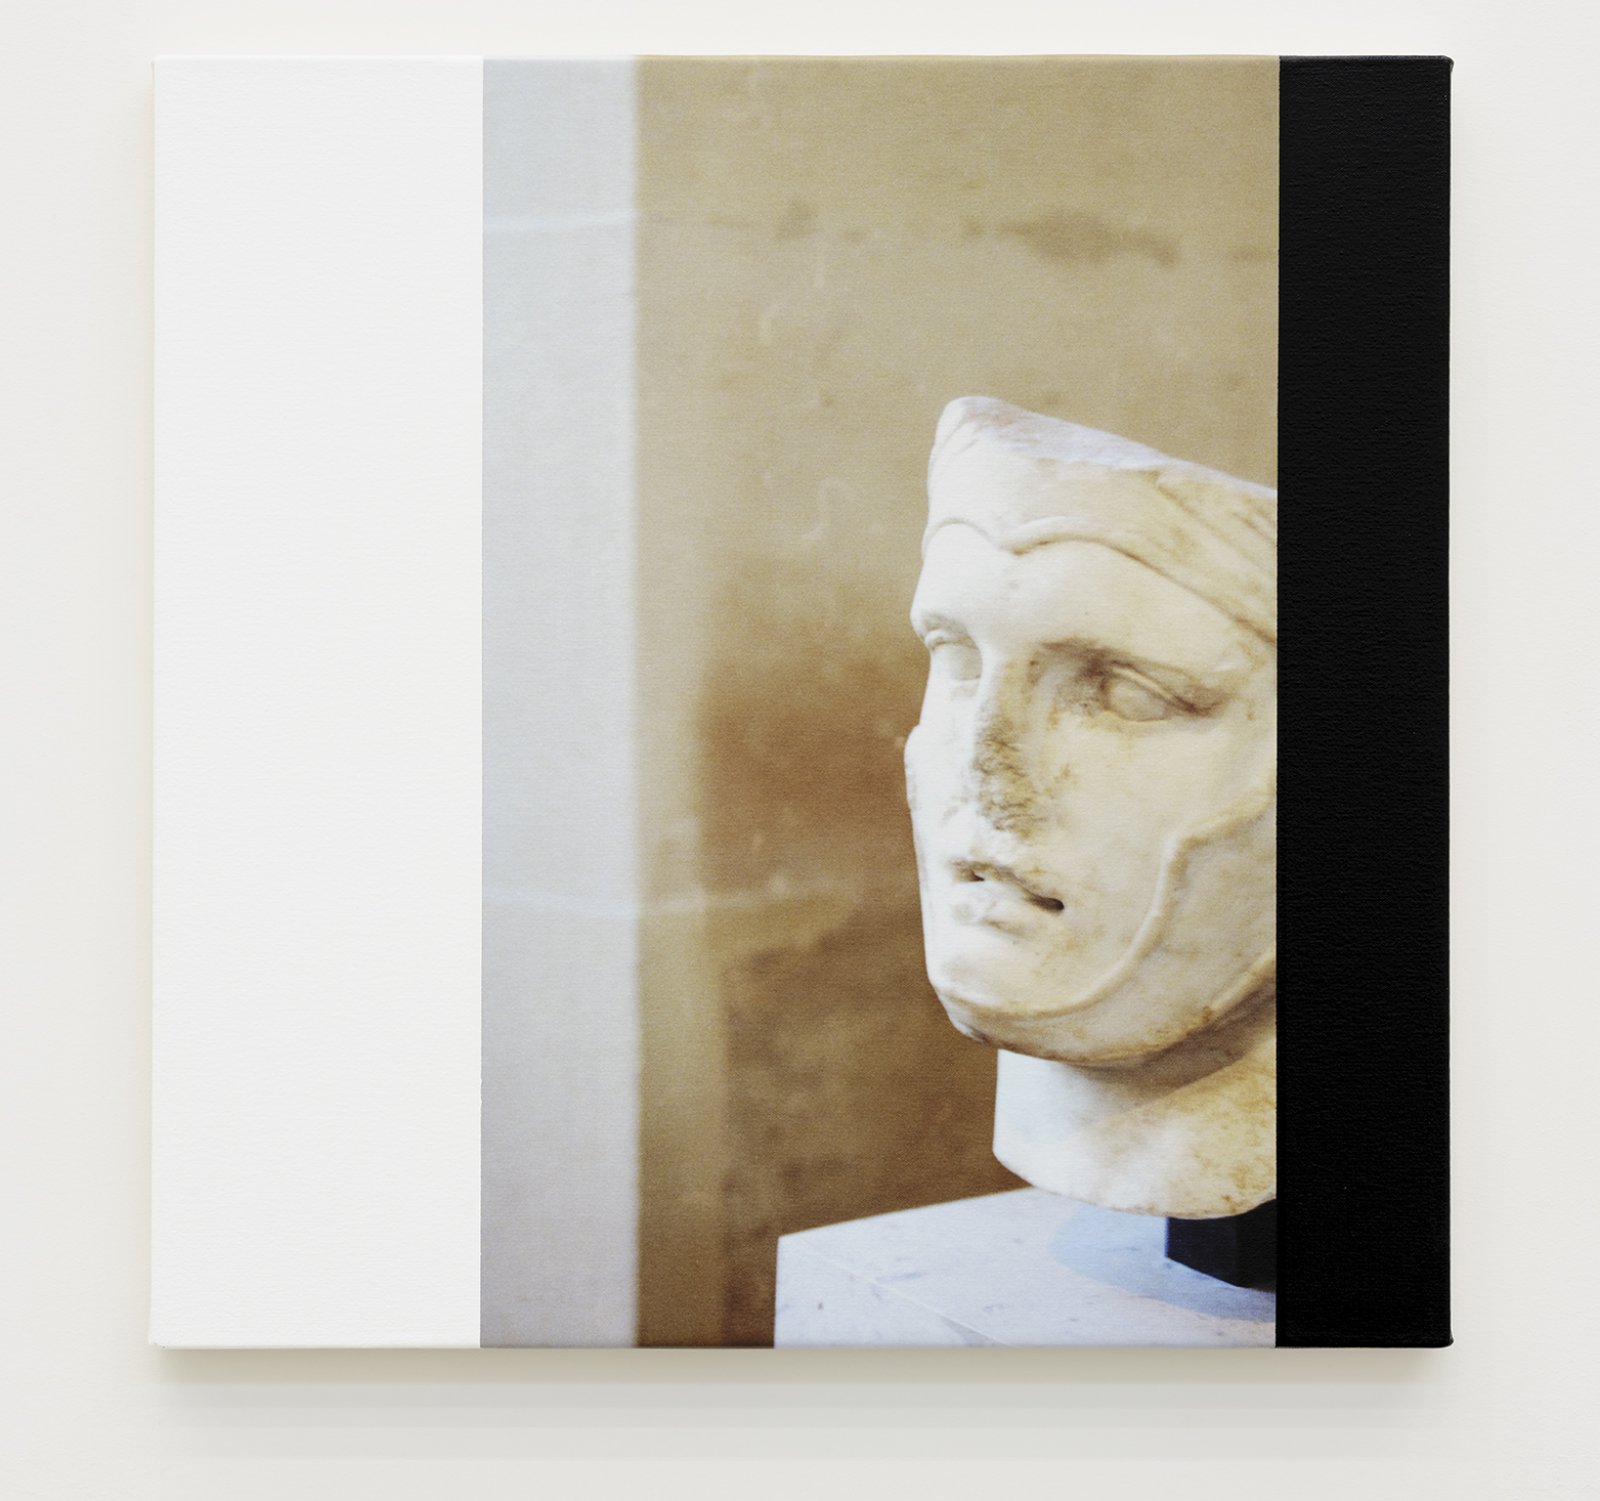 Ian Wallace, Roman Heads I–IV, 1990/2015, photolaminate with acrylic on canvas, 4 parts, each 24 x 24 in. (61 x 61 cm)